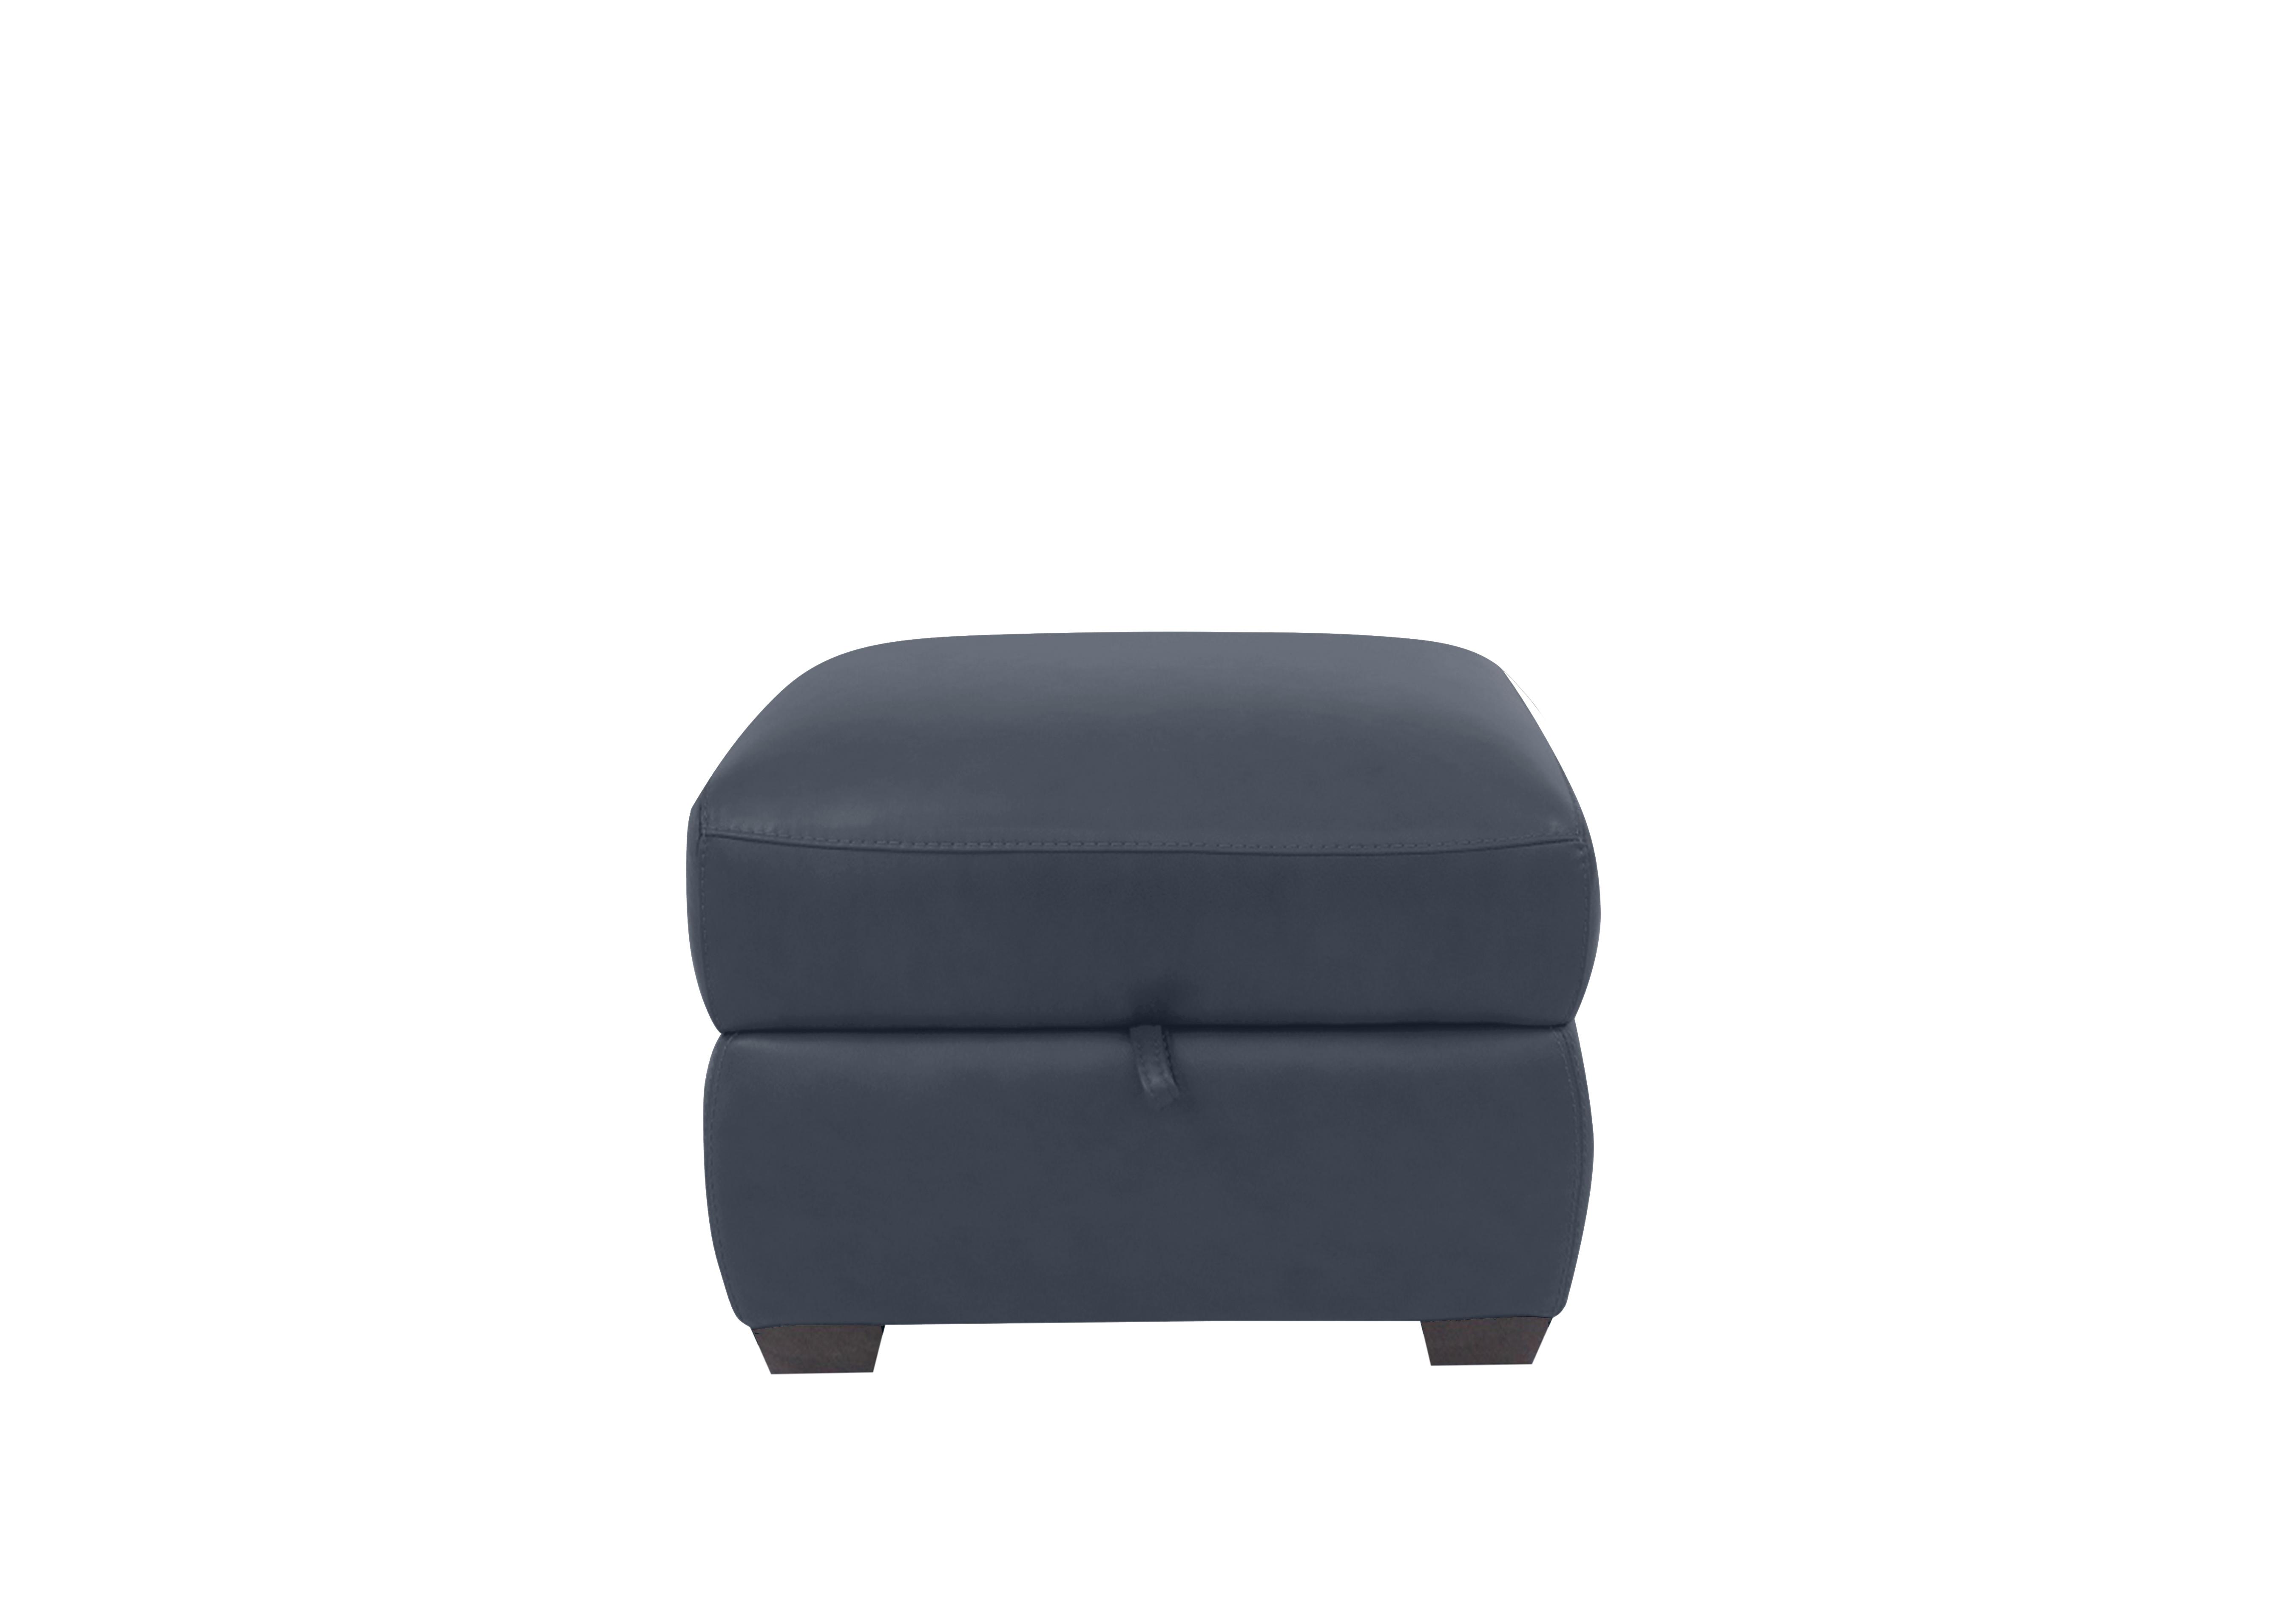 Cozee Leather Storage Stool in Bv-313e Ocean Blue on Furniture Village